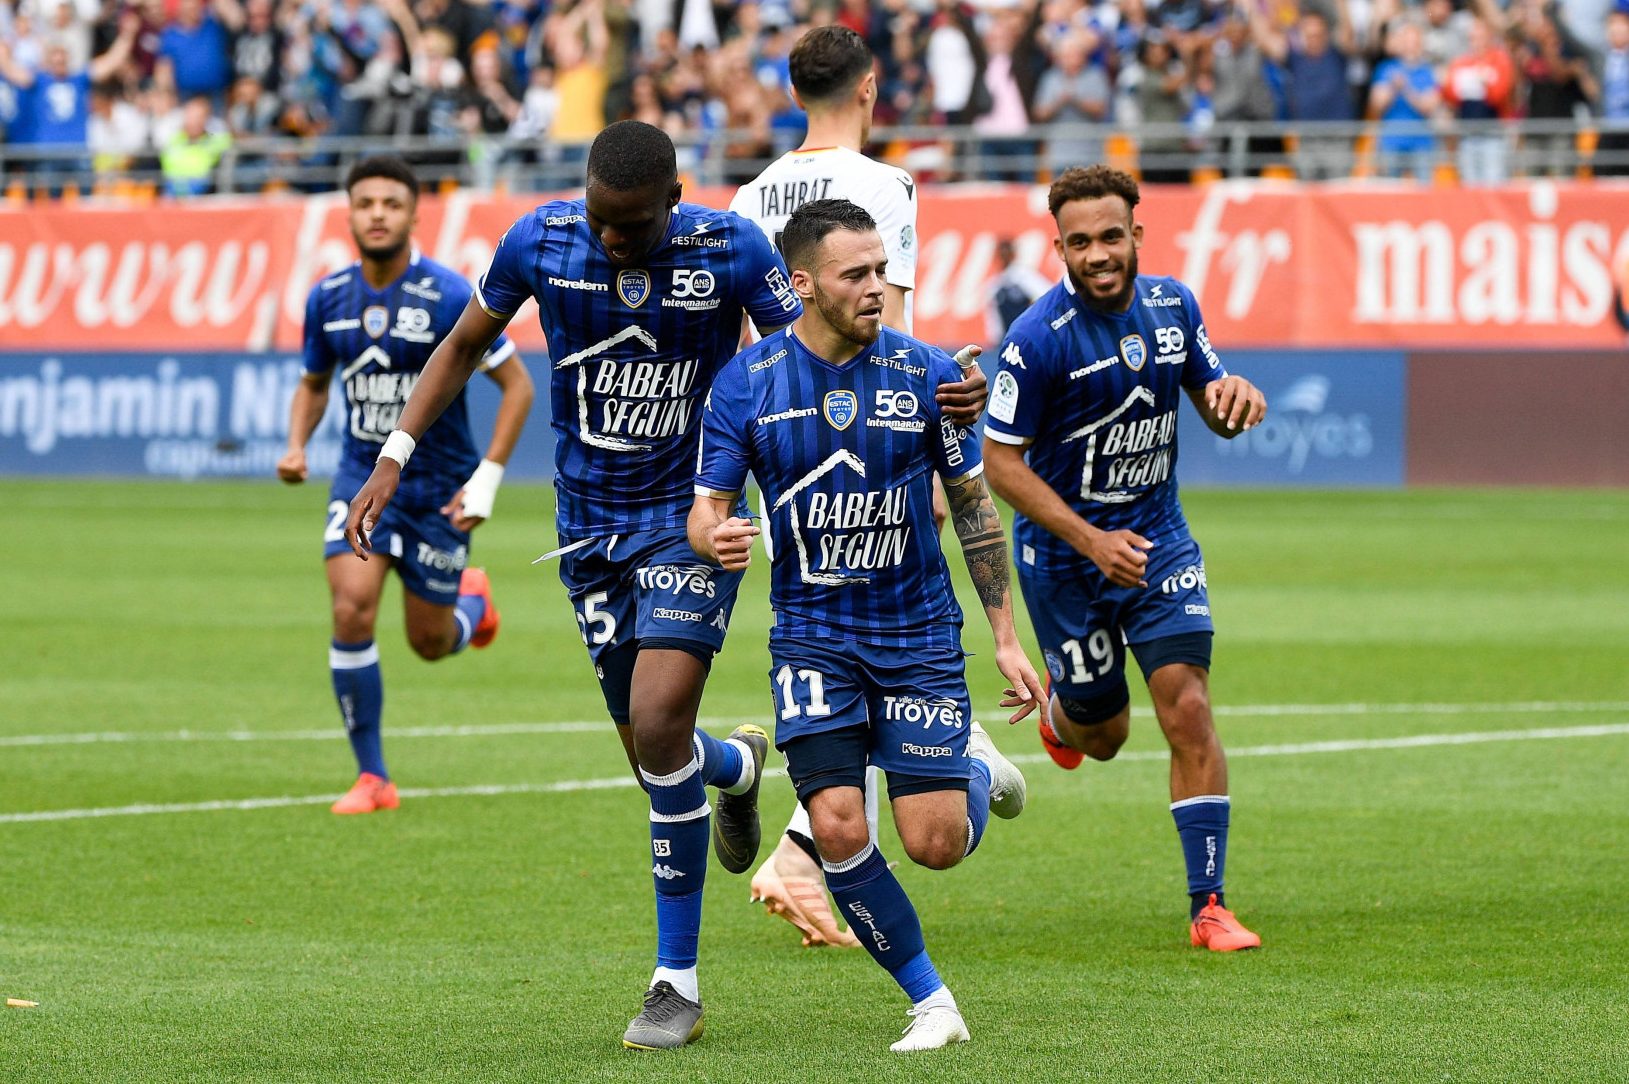 City Football Group add ESTAC Troyes as 10th club - Punch Newspapers